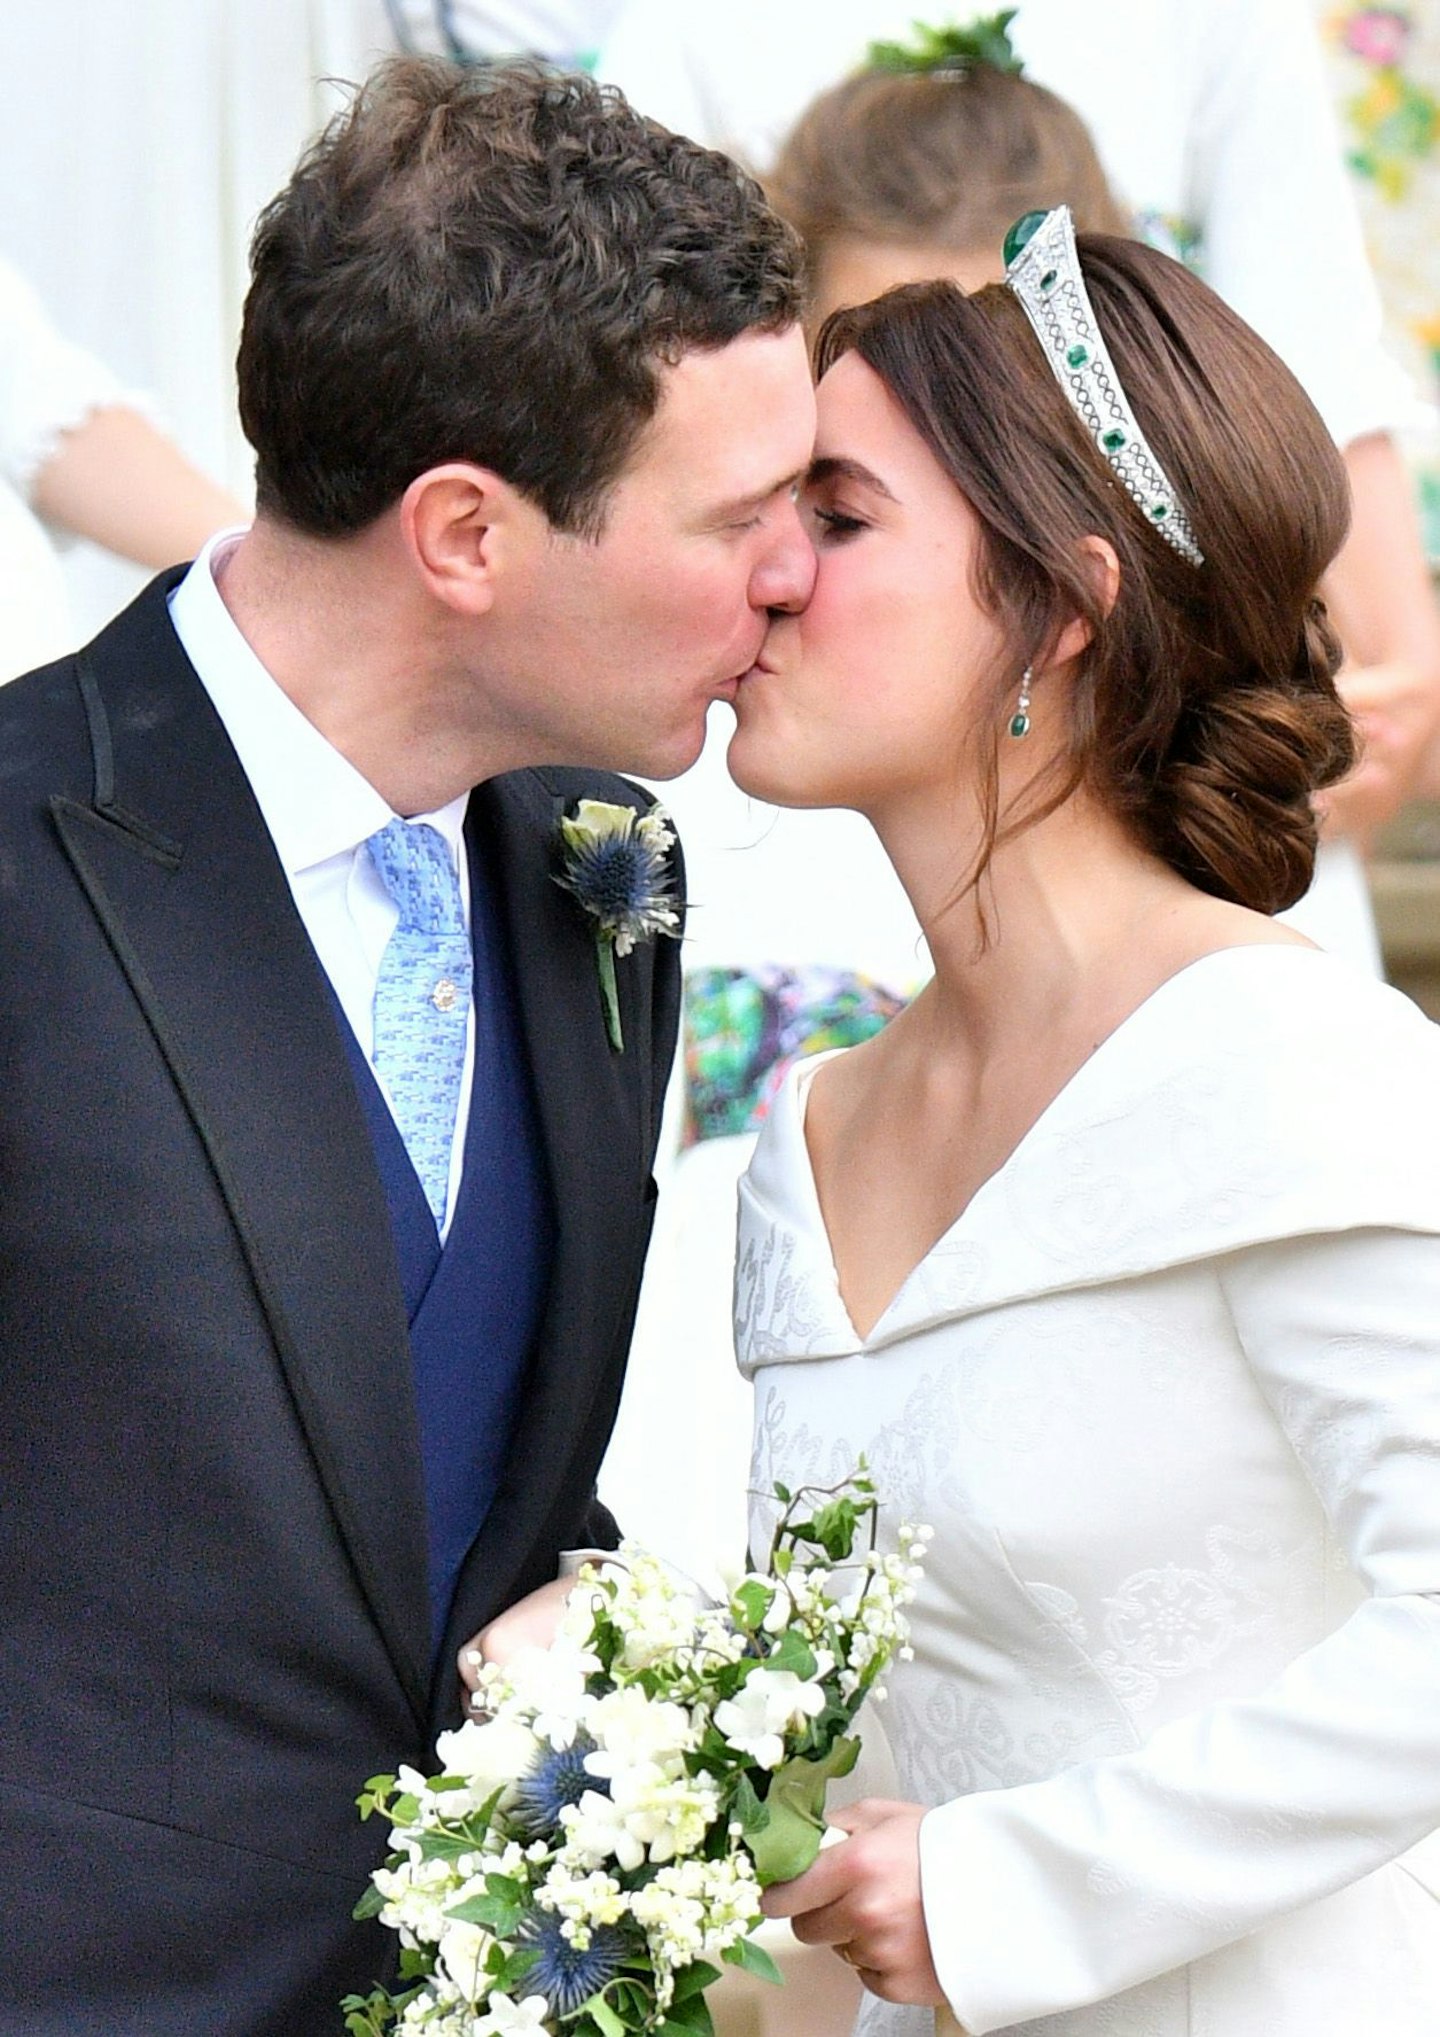 Jack Brooksbank and Princess Eugenie on their wedding day